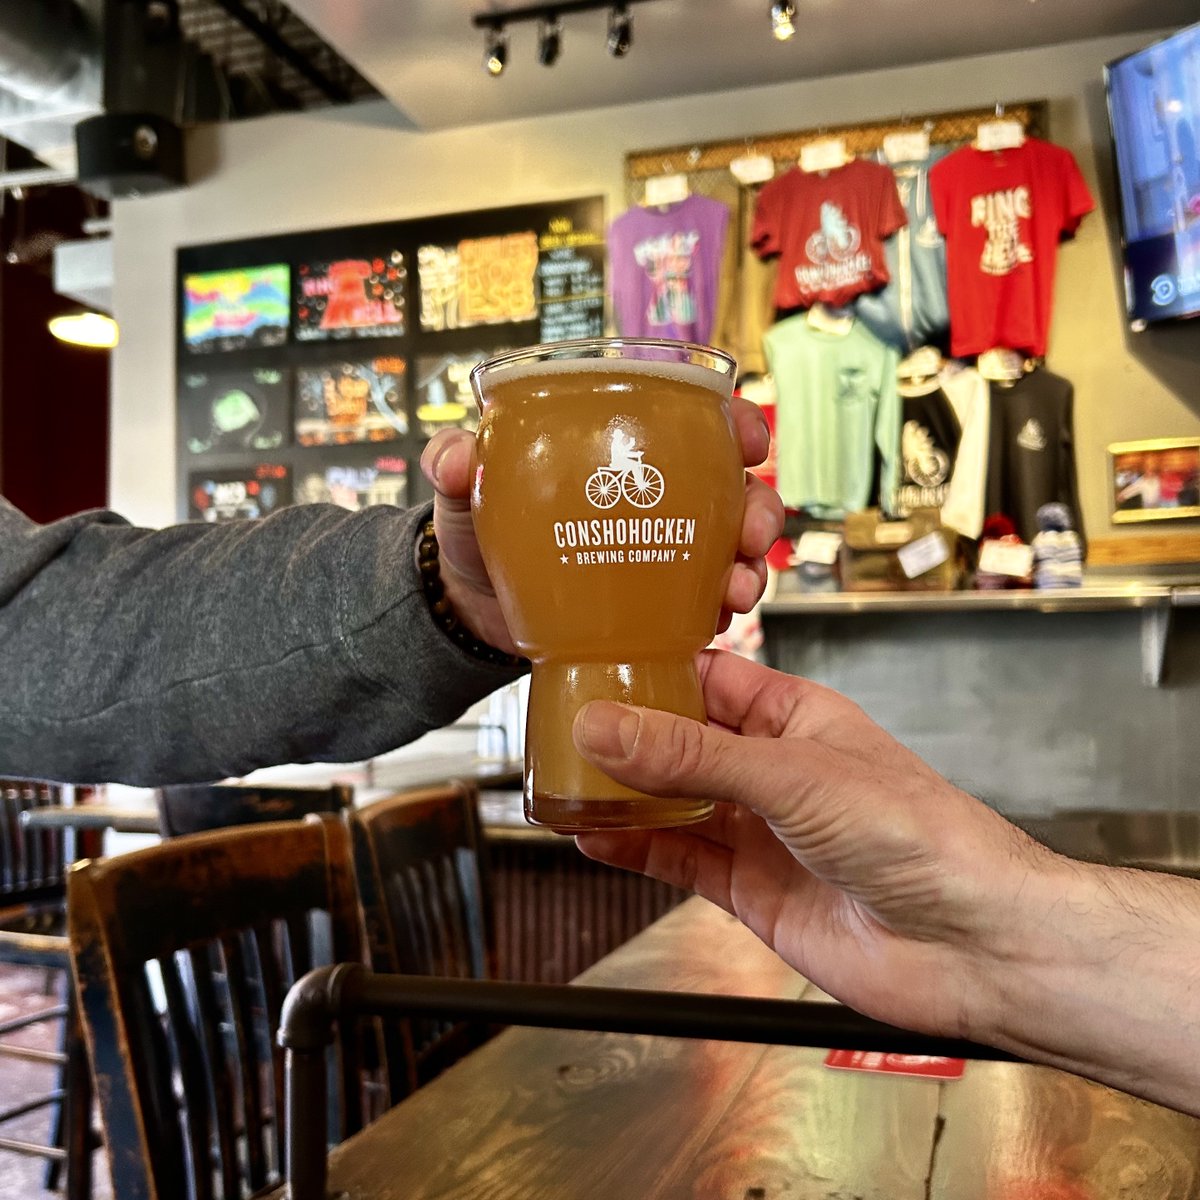 Friends give friends good beer. Let's be friends 🤝 Visit us at any of our four locations or order online at ConshyExpress.com for fresh, local beer. Cheers 🍻 @conshohockenbrewingconshy @conshohockenkop @puddlerskitchenbridgeport @recroomphoenixville